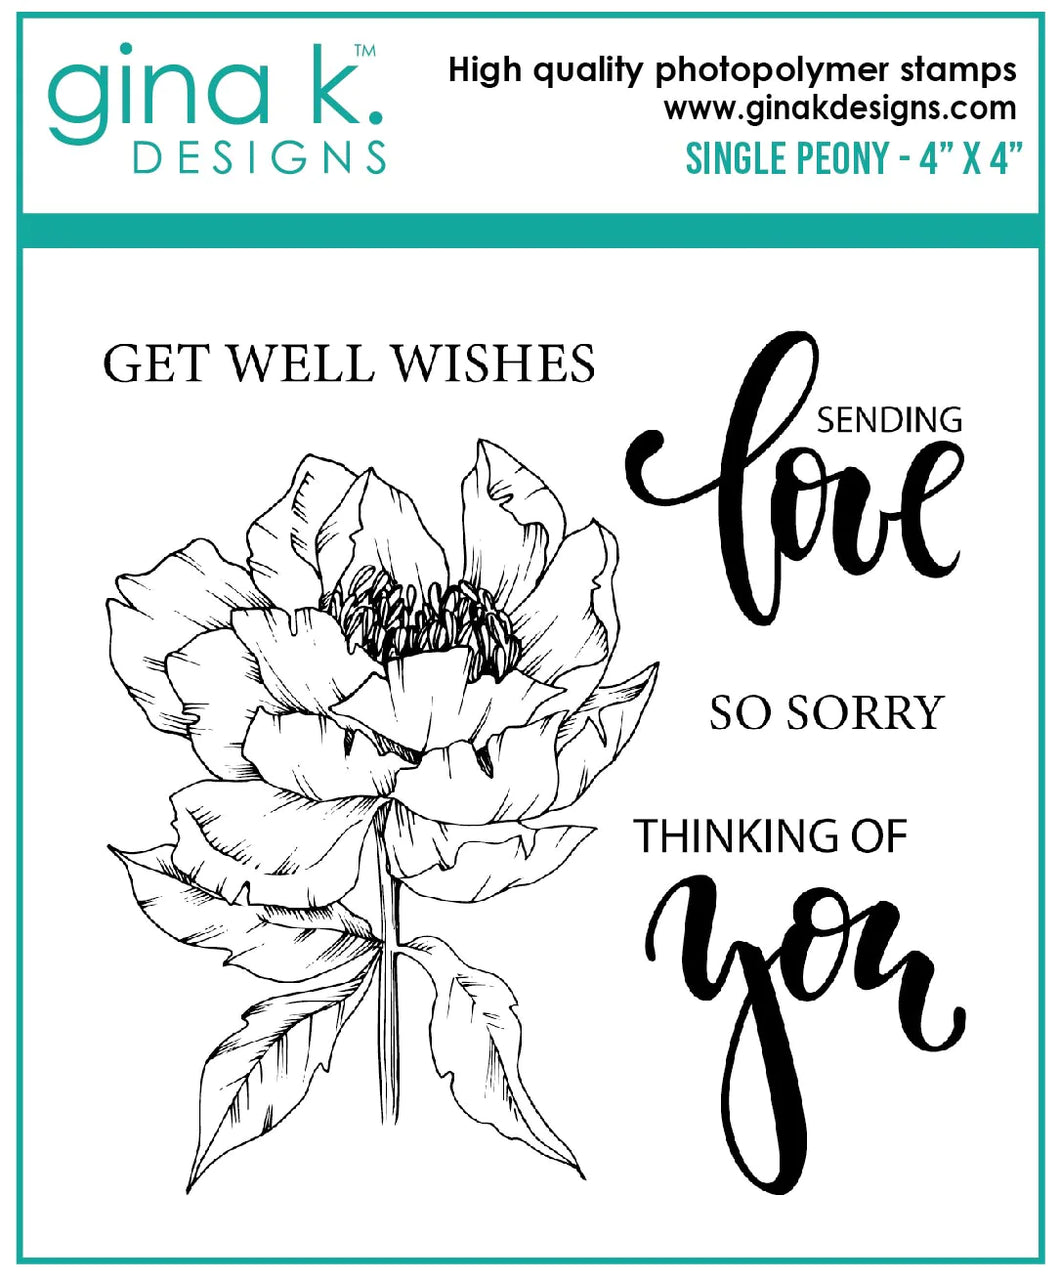 Gina K. Designs - Mini Stamp - Single Peony. Single Peony is a stamp set by Gina K Designs. This set is made of premium clear photopolymer and measures 4